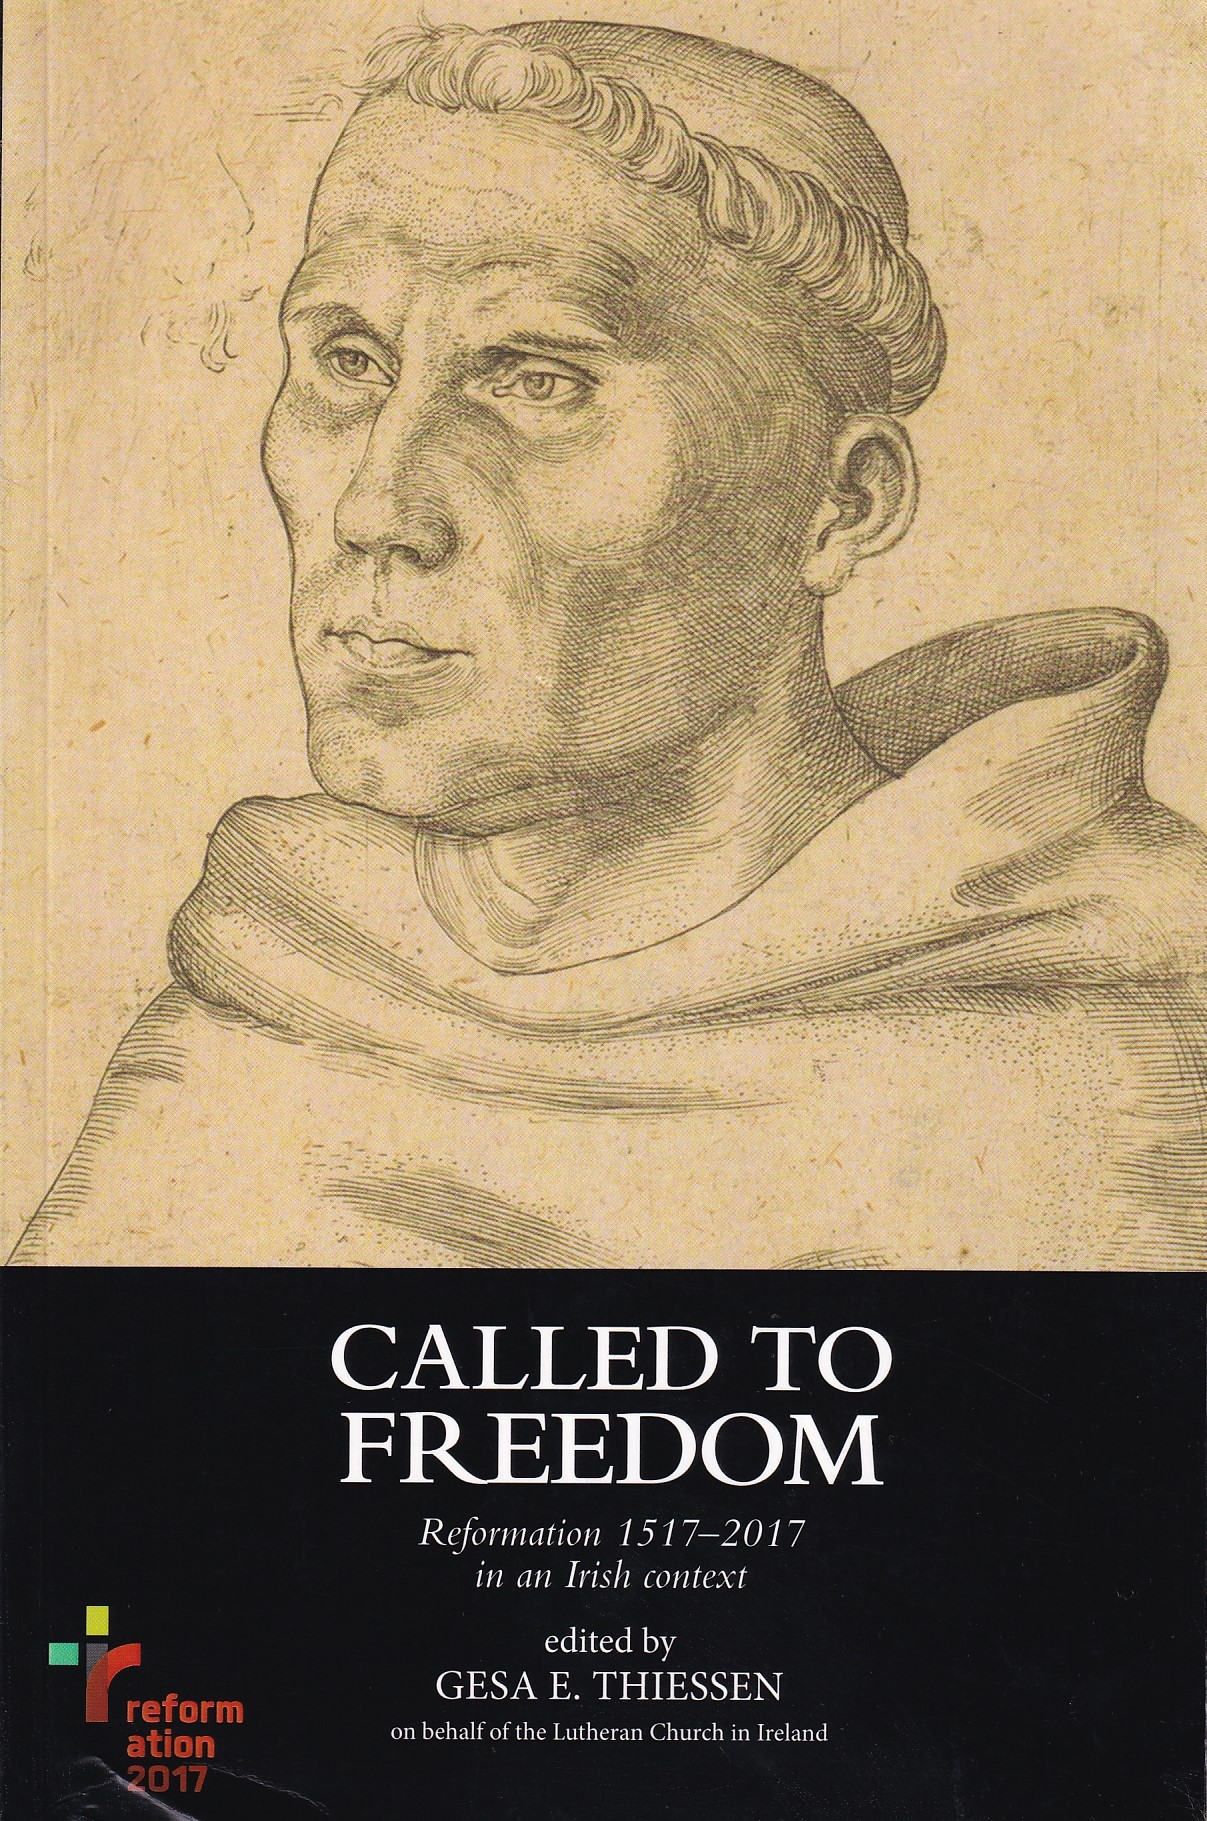 Called to Freedom: Reformation 1517-2017 in an Irish context | Gesa E. Thiessen (ed.) | Charlie Byrne's